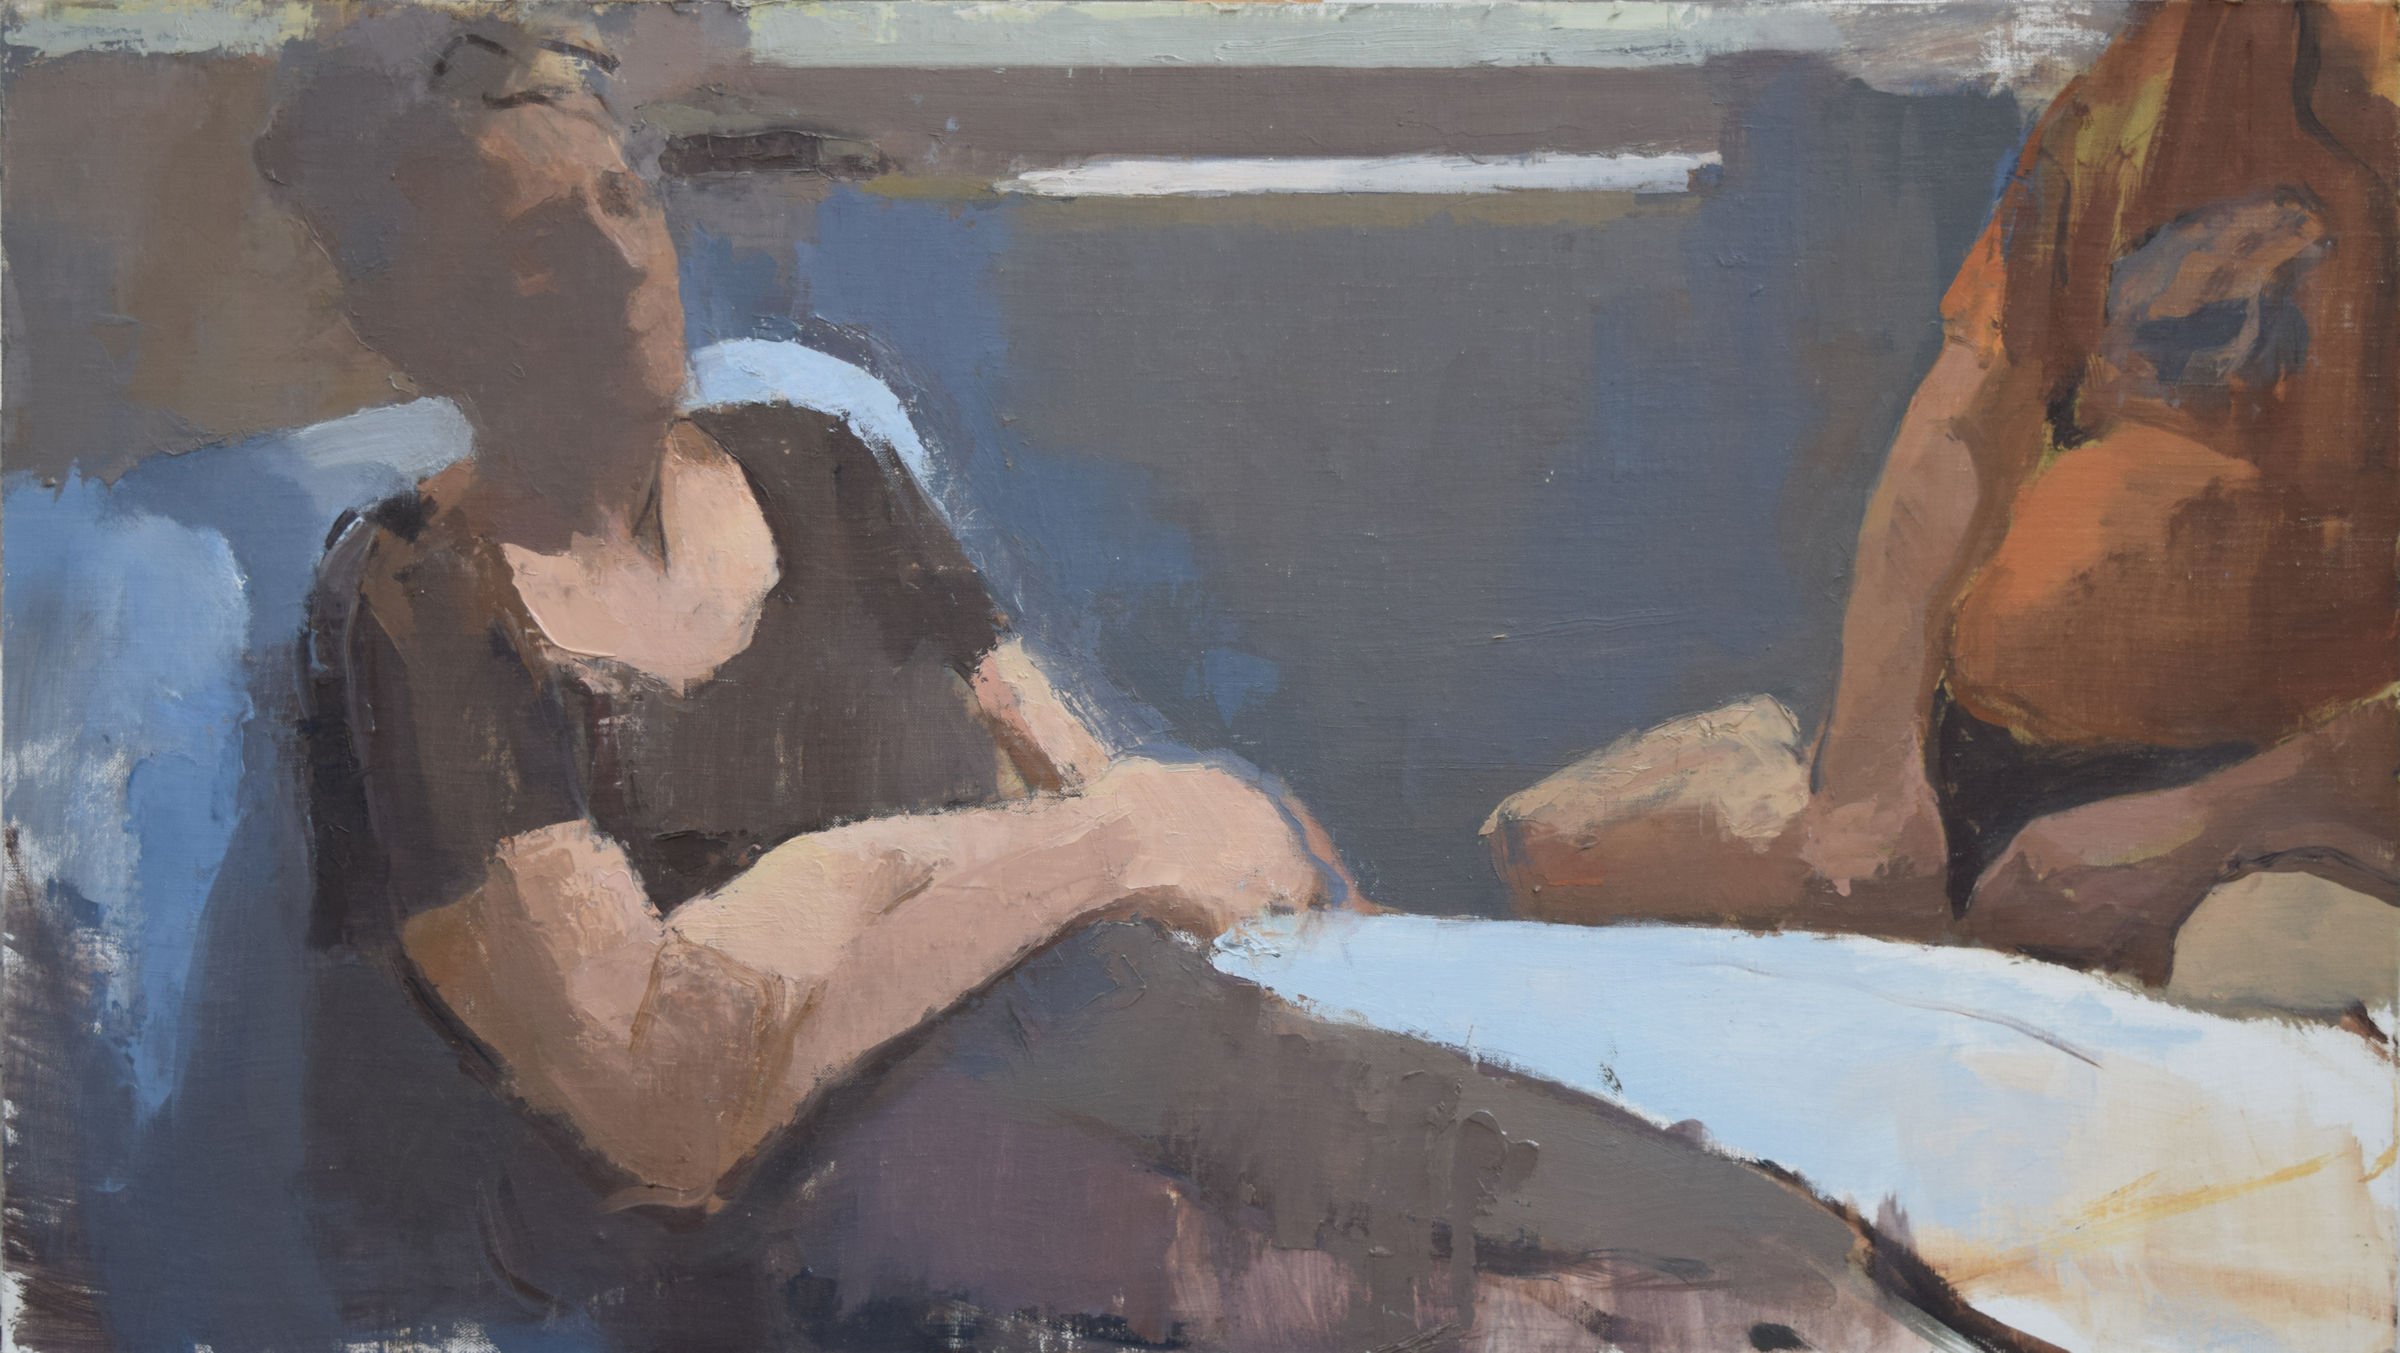   Mom and Paul   2014  19” x 34”  oil on linen 